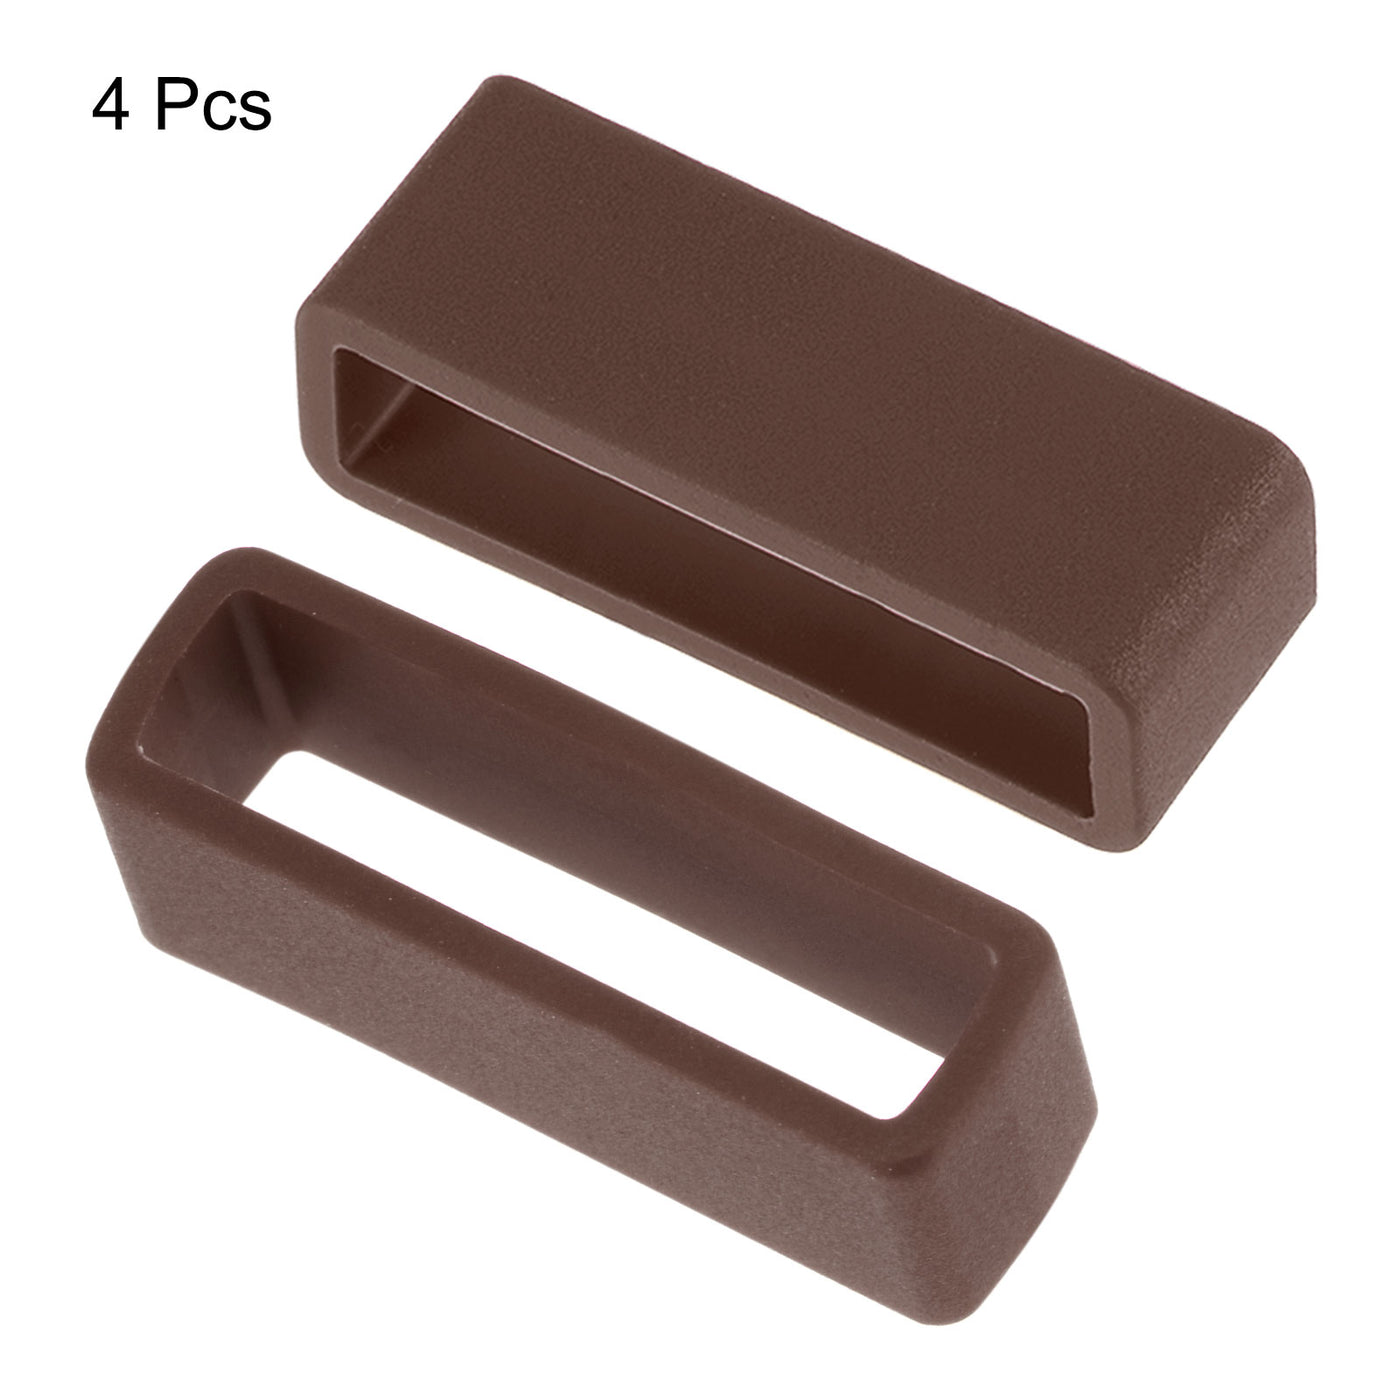 Uxcell Uxcell Watch Band Strap Loops Silicone for 28mm Width Watch Band, Brown 4 Pcs